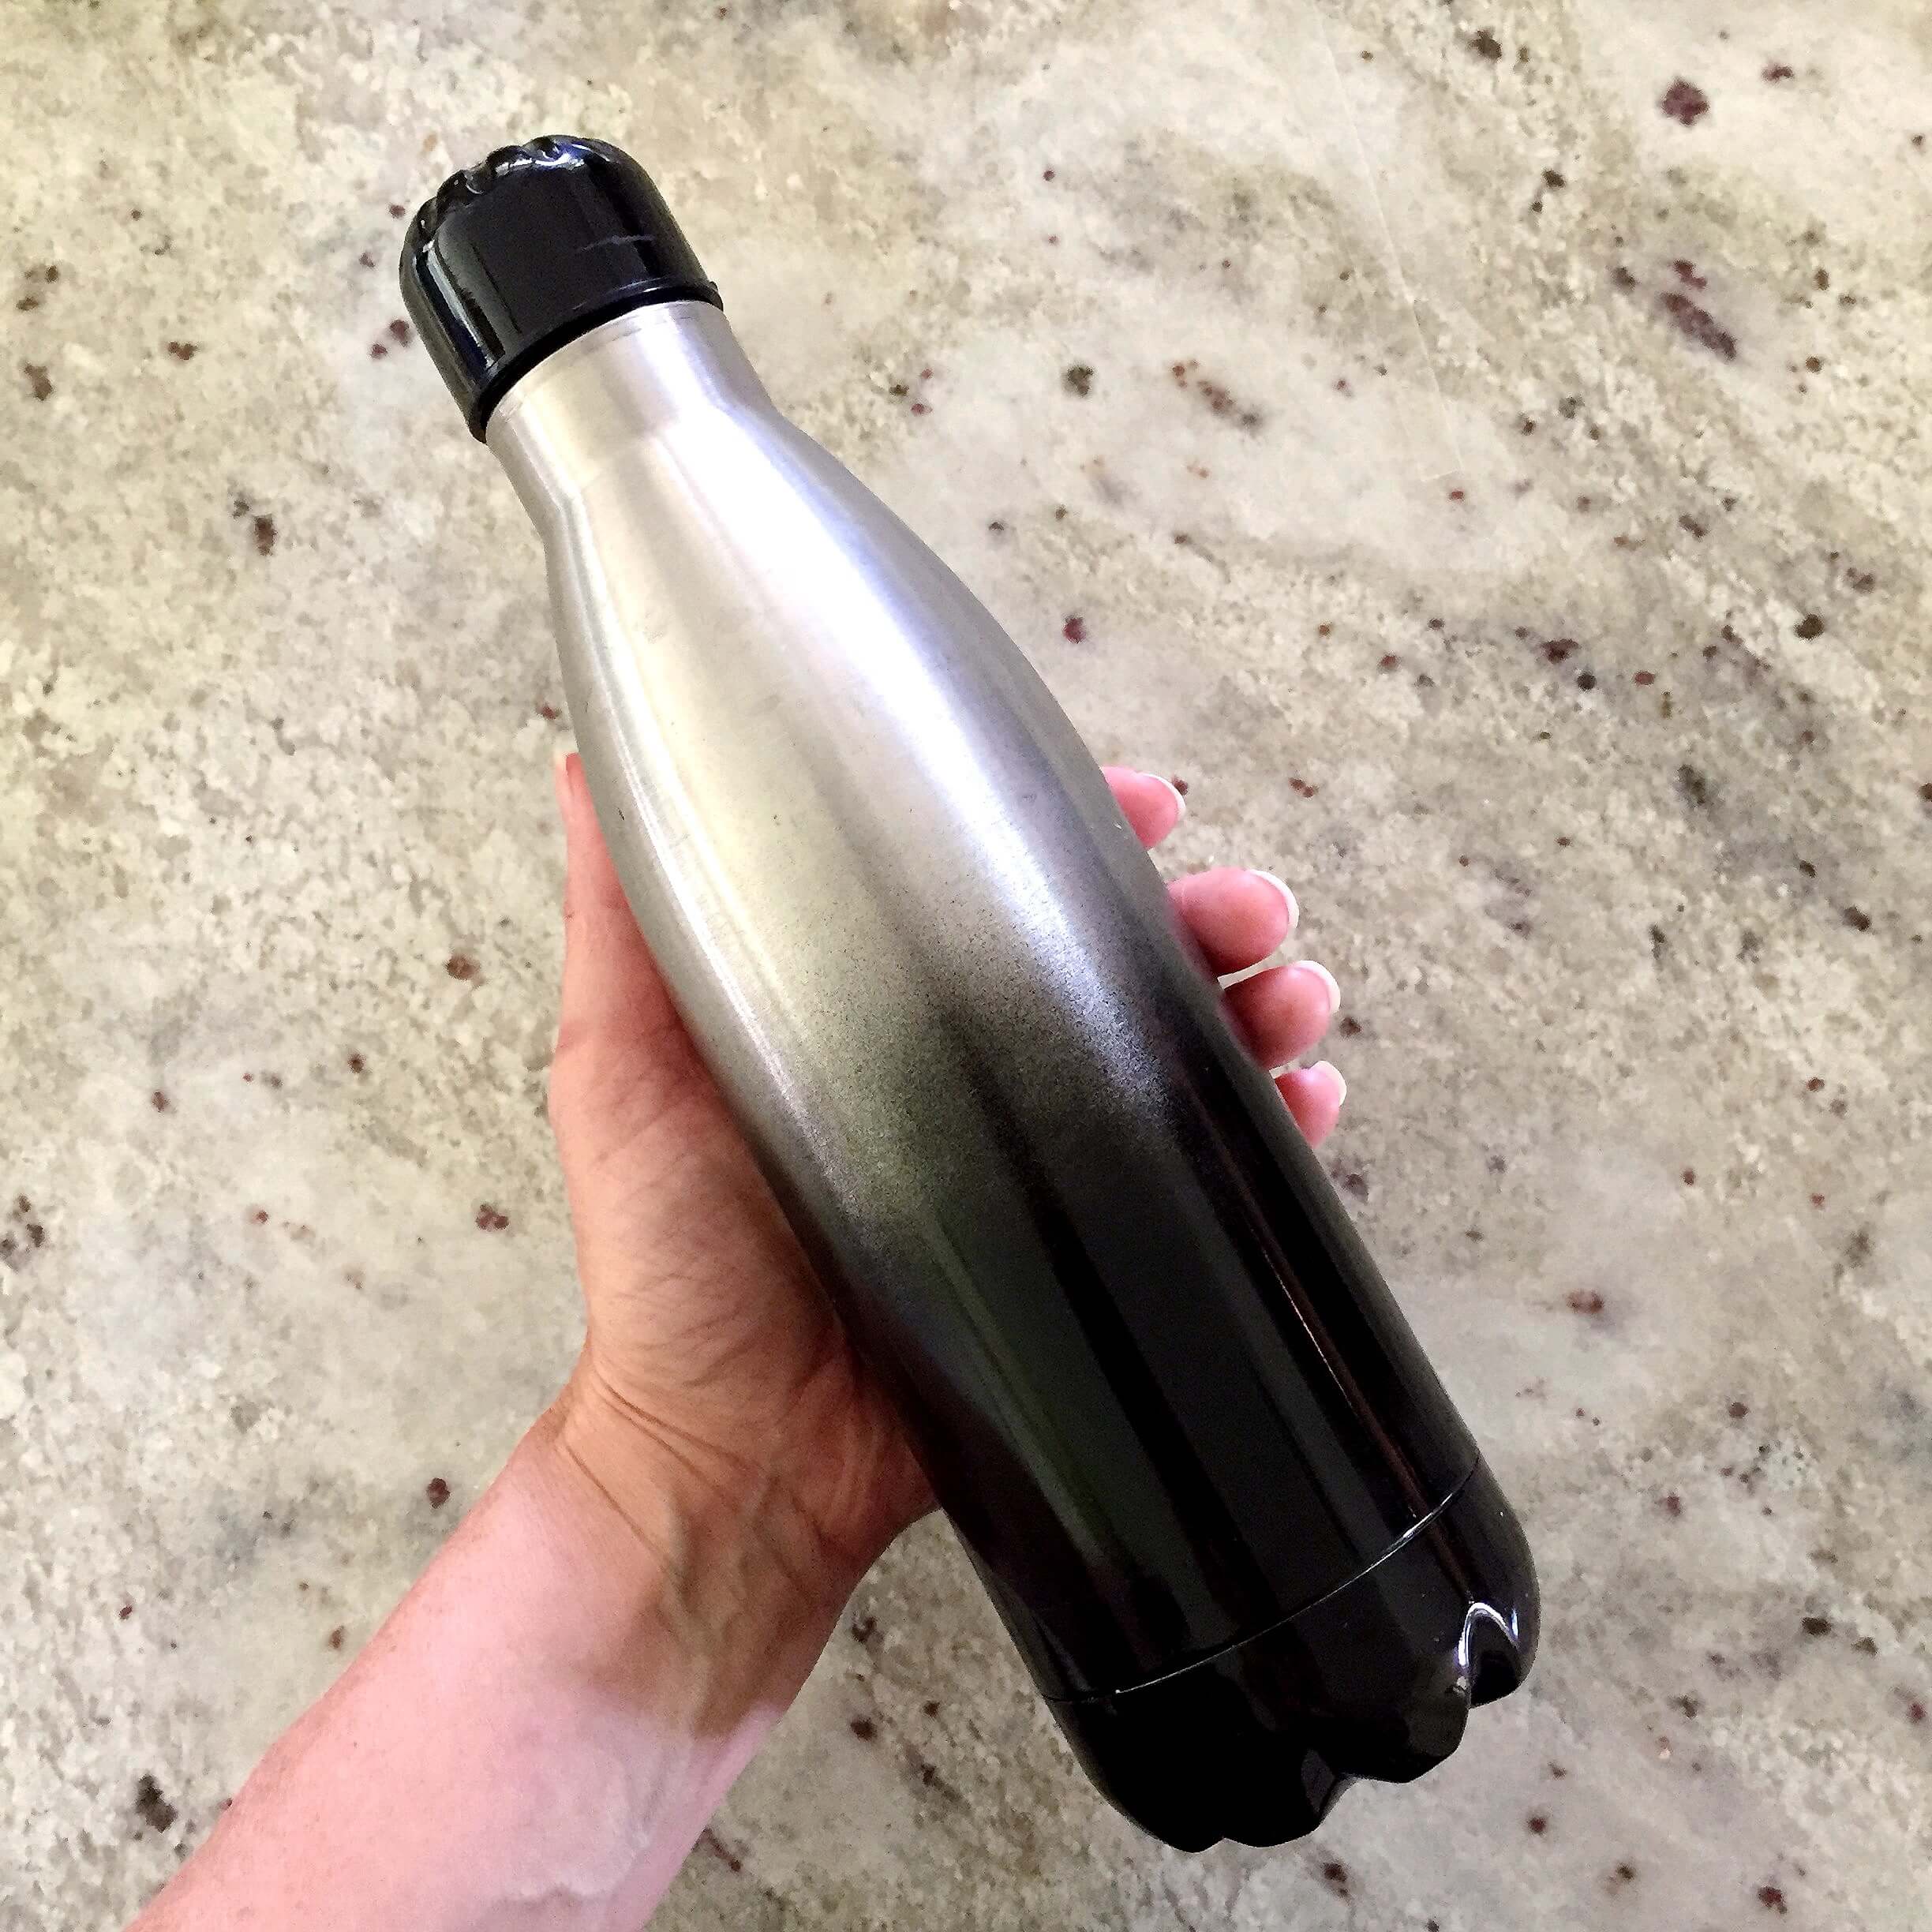 How to Clean Your Stainless Steel Tumbler